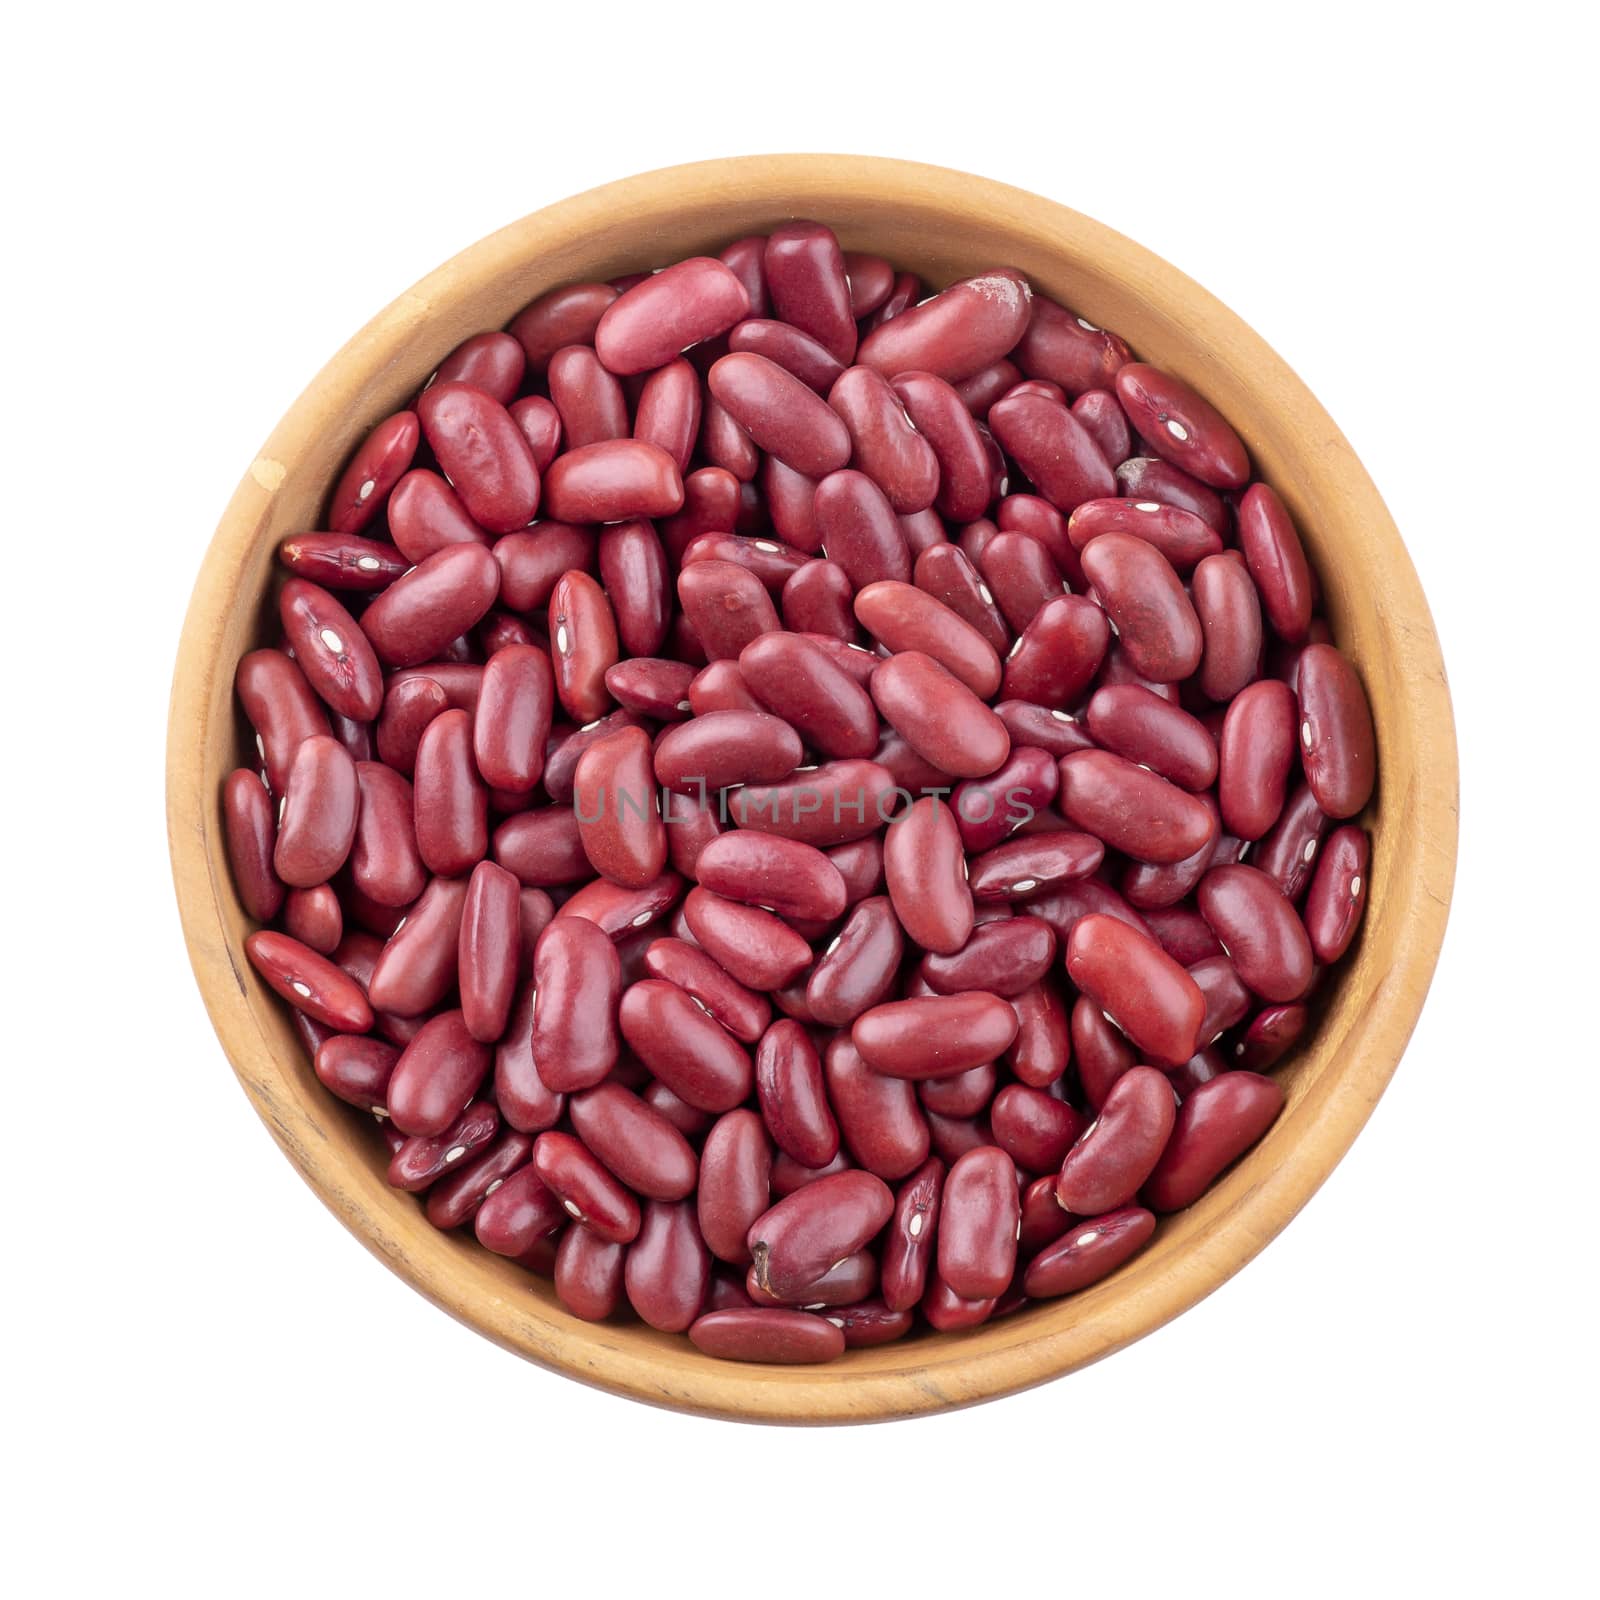 red beans in a wooden bowl isolated on white background by kaiskynet